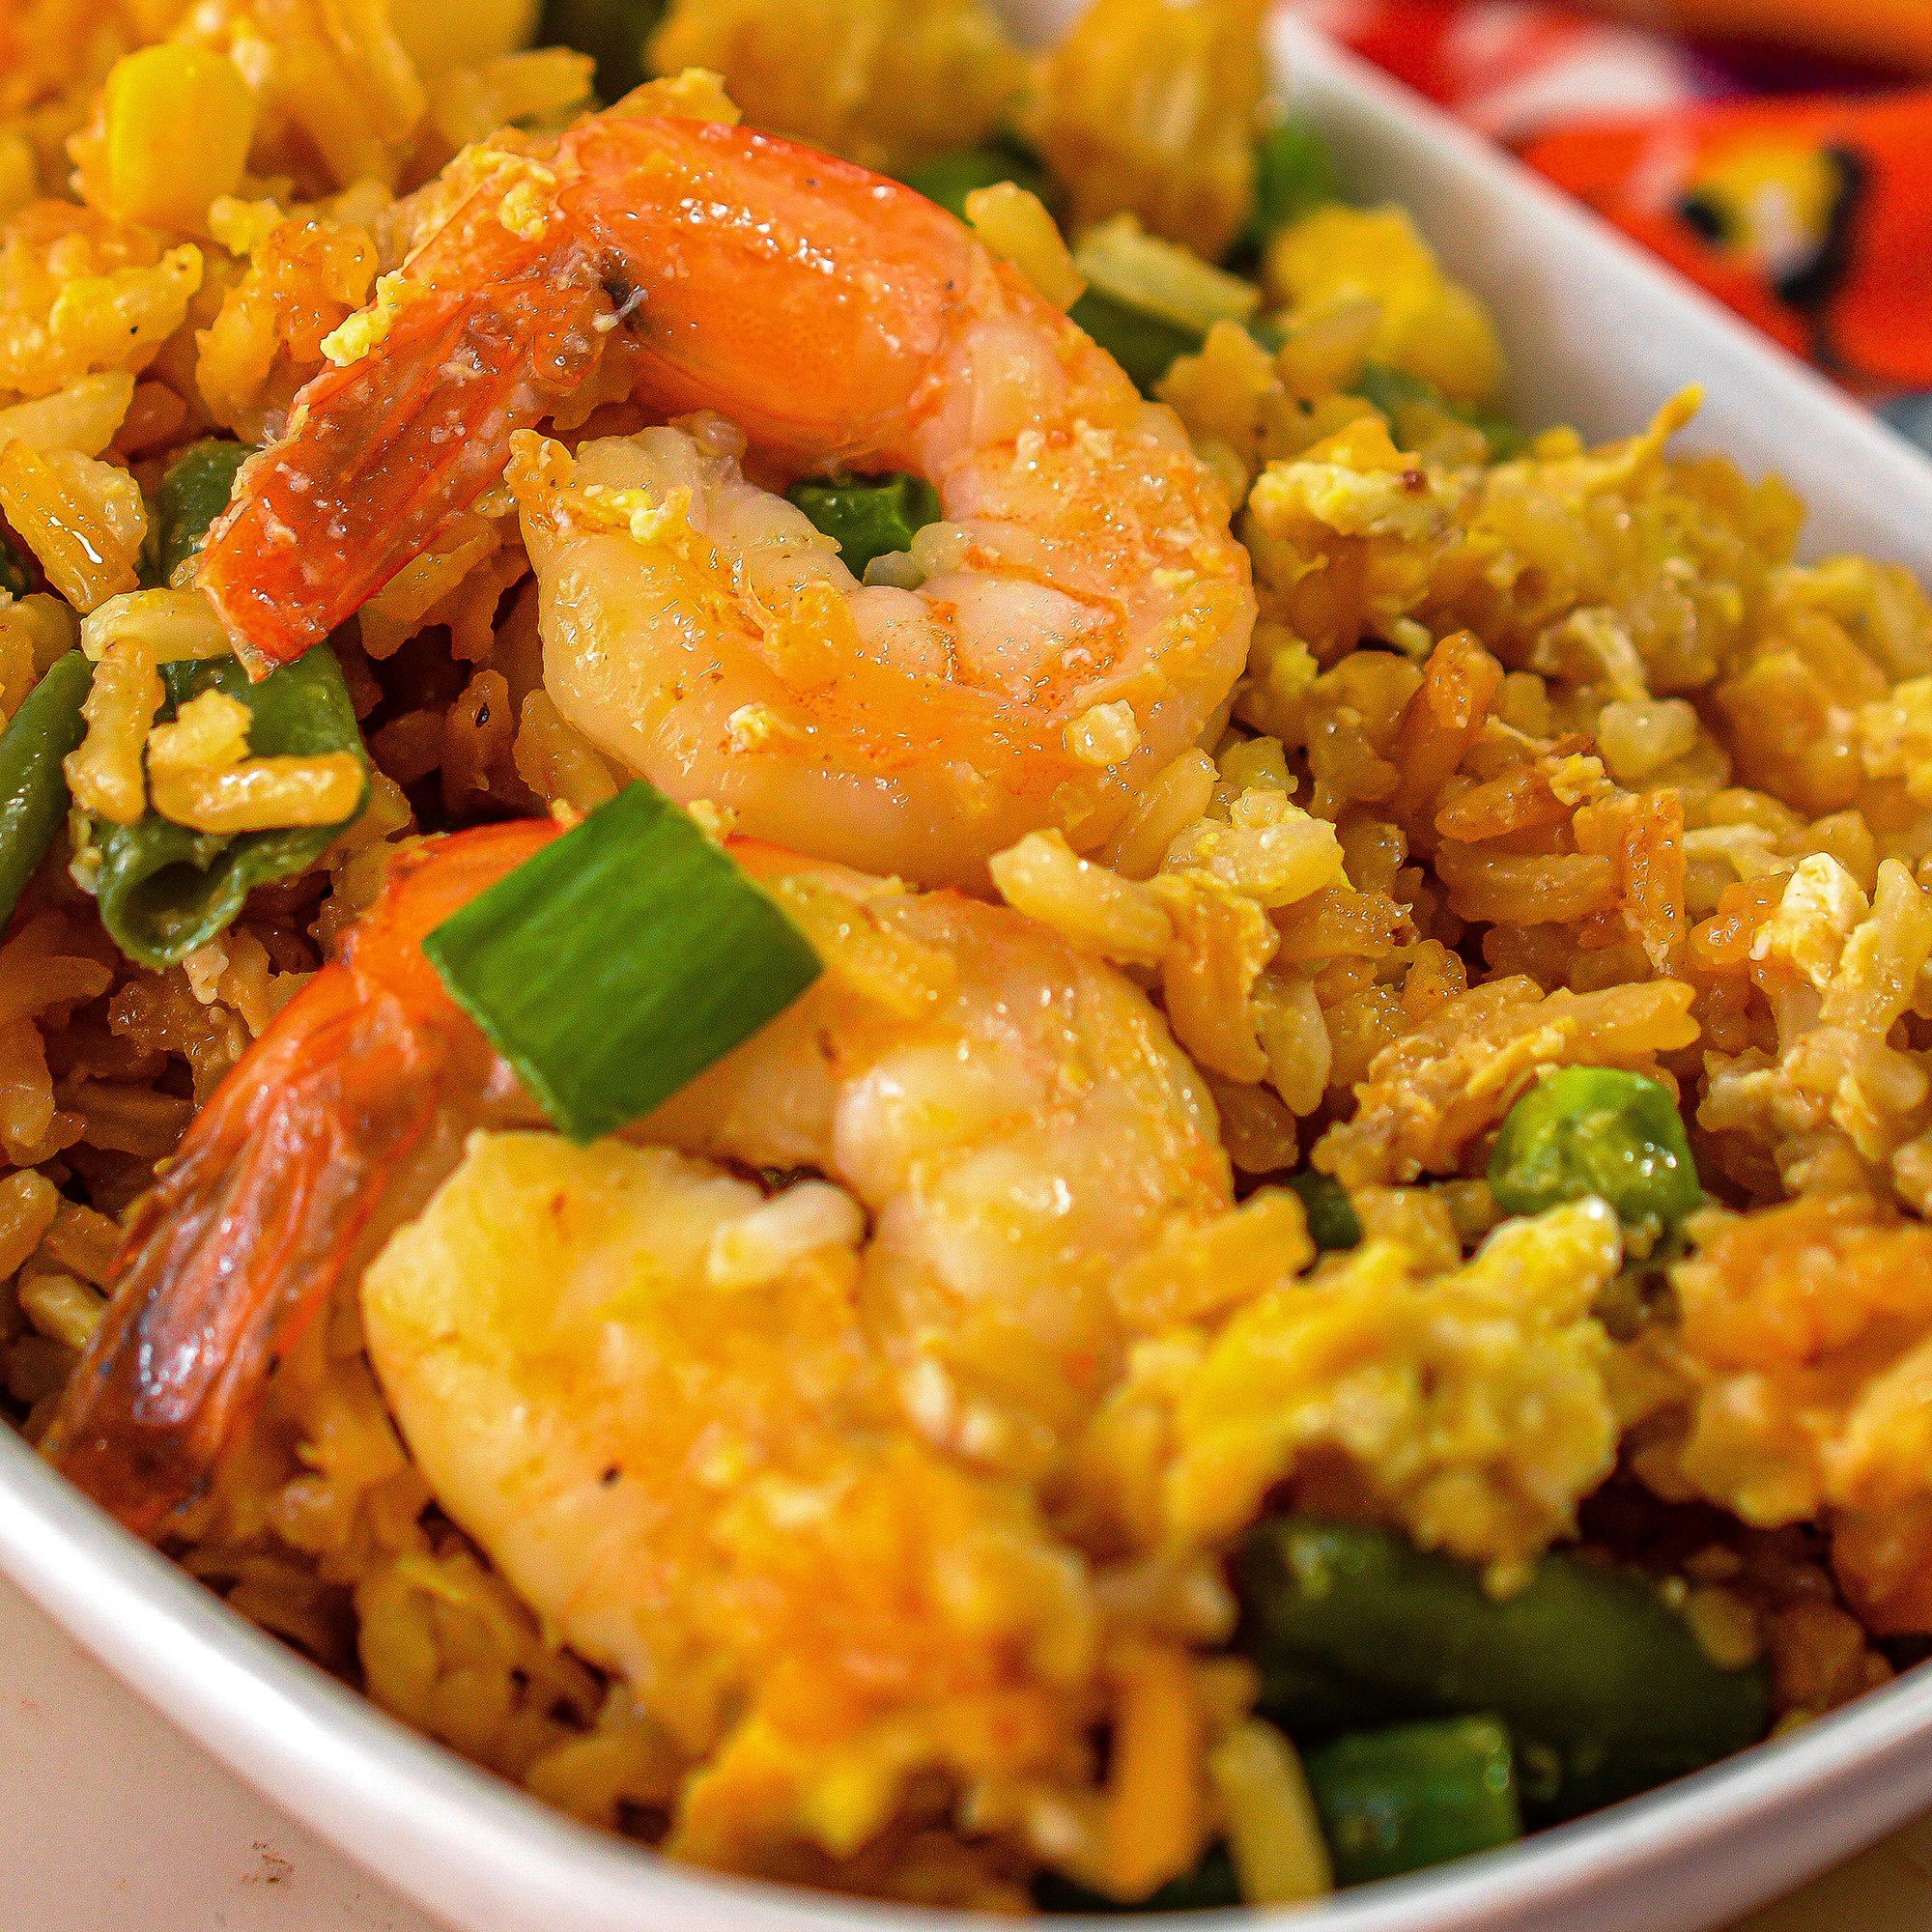 Fried Rice with Shrimp
